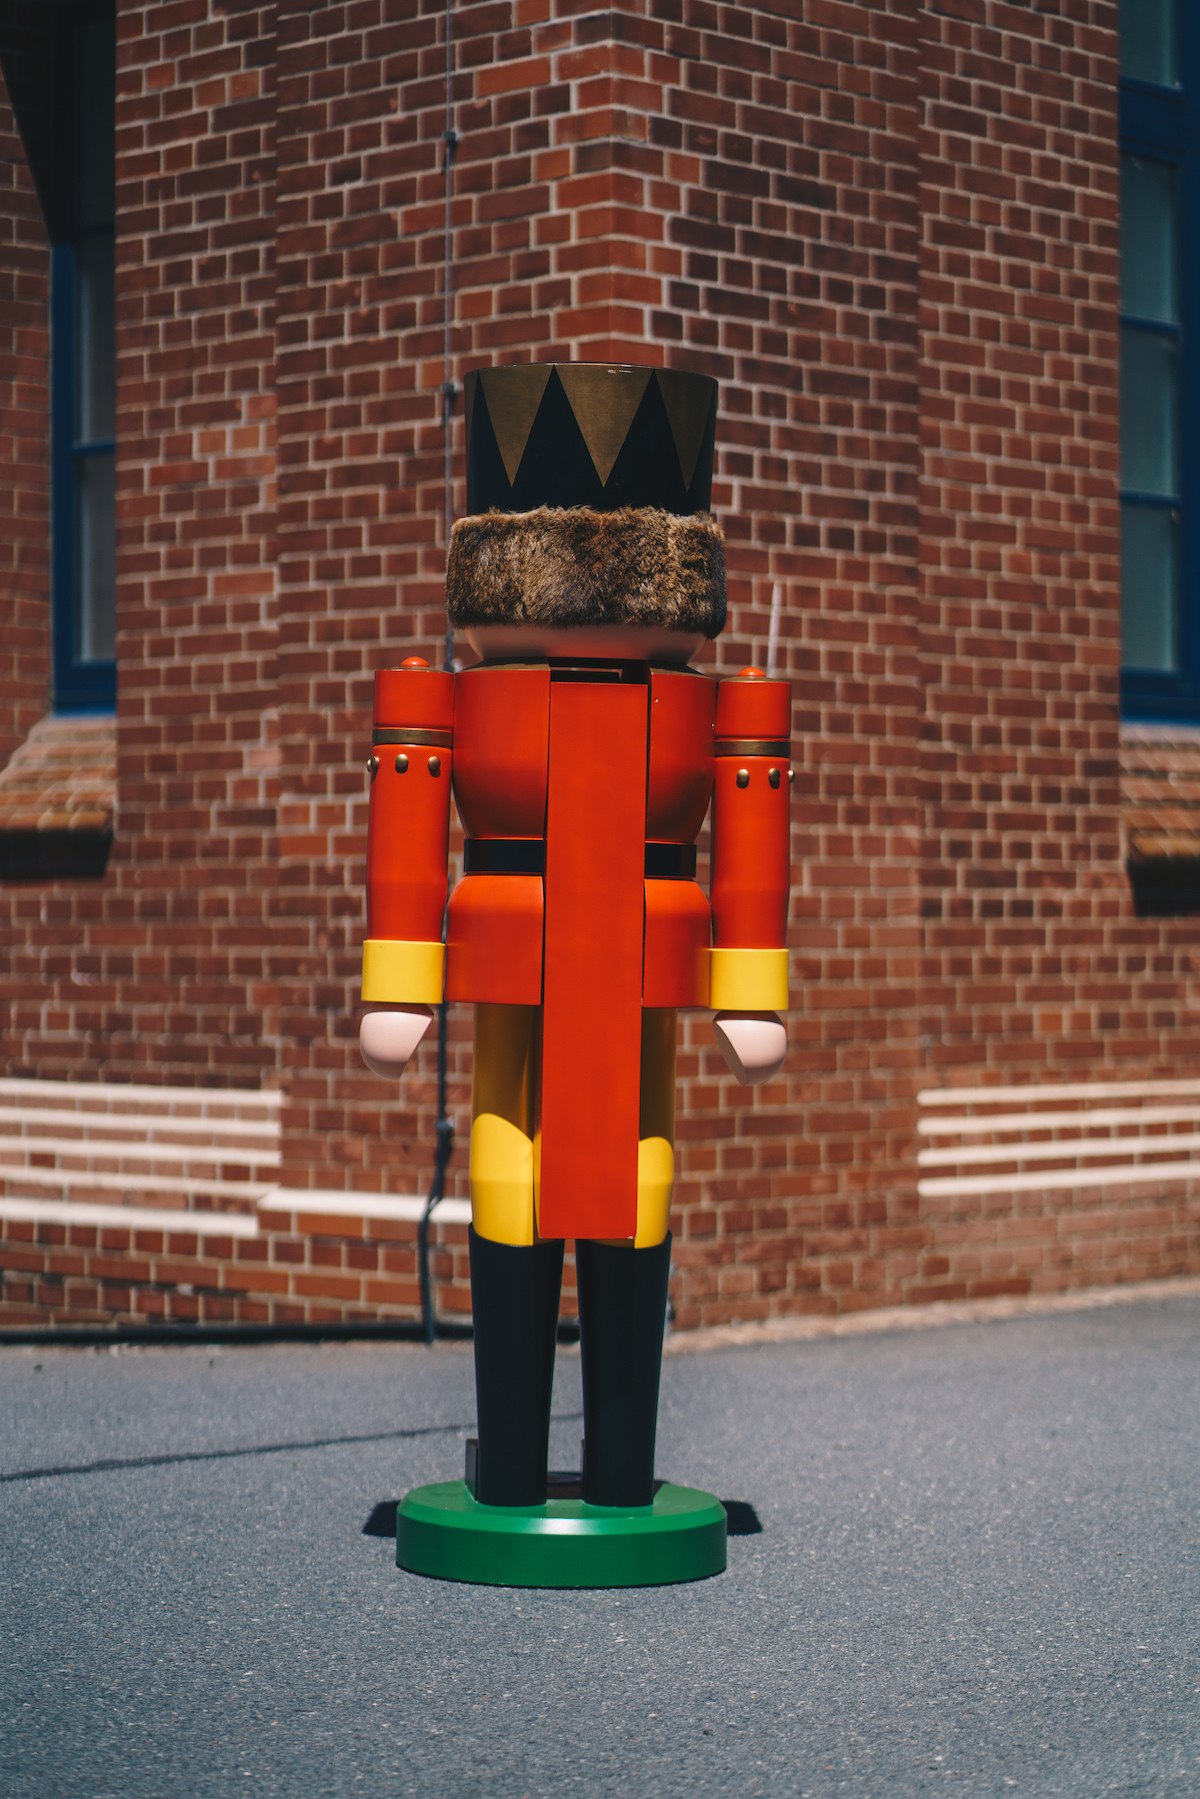 The rear view of a large figure (big nutcracker) can be seen. This looks on a wall in the background.